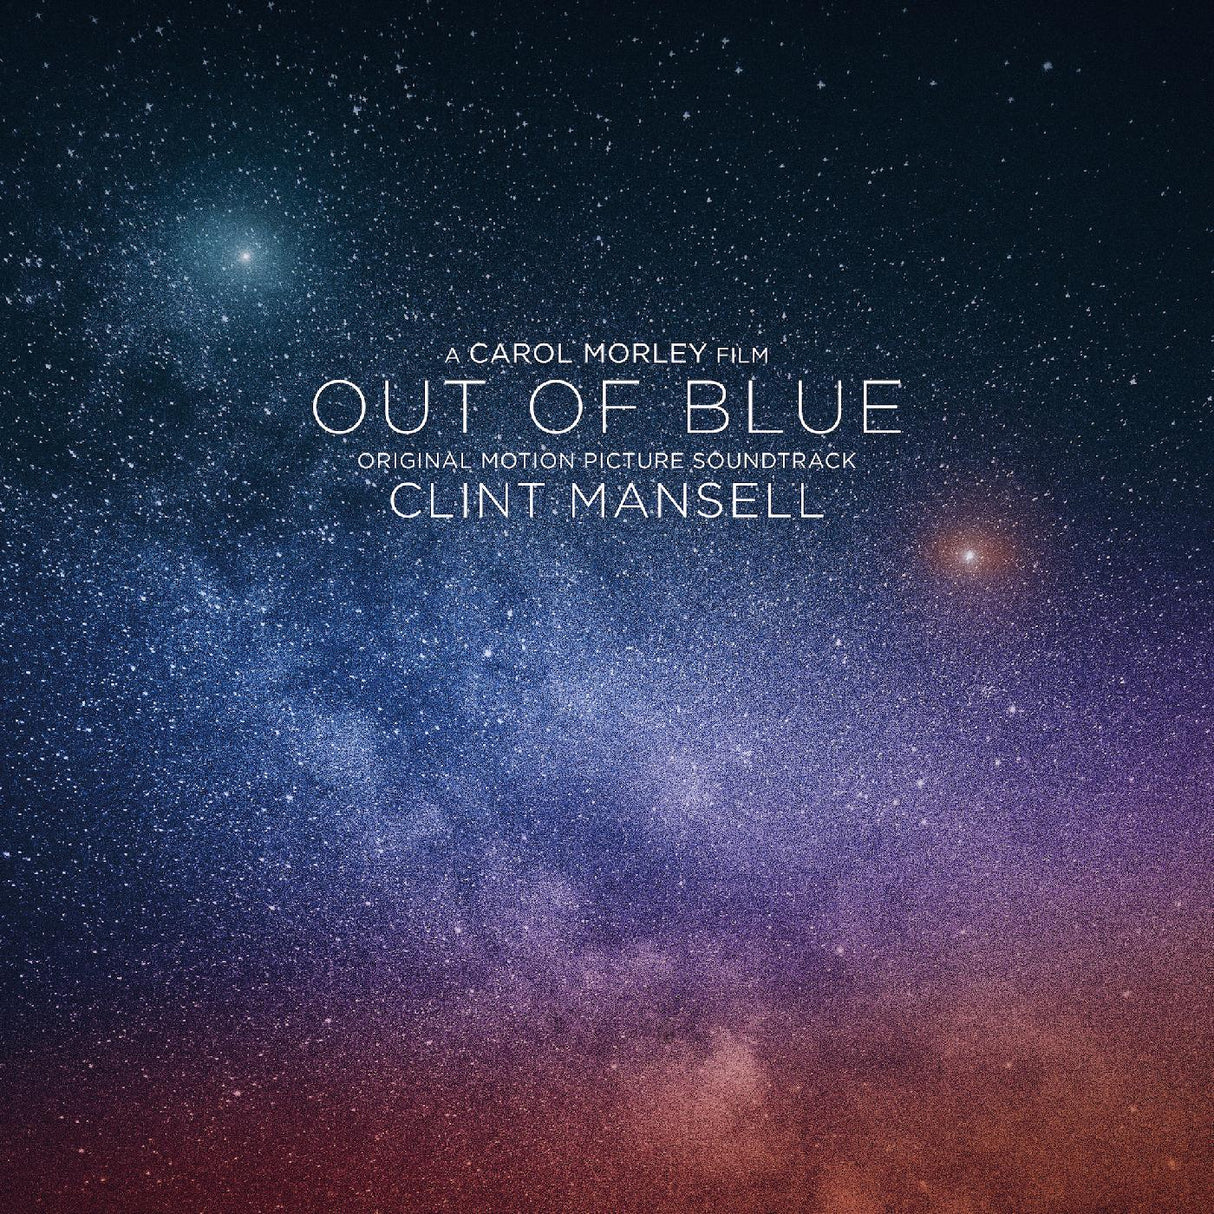 Clint Mansell - Out Of Blue (Original Motion Picture Soundtrack) [Vinyl]